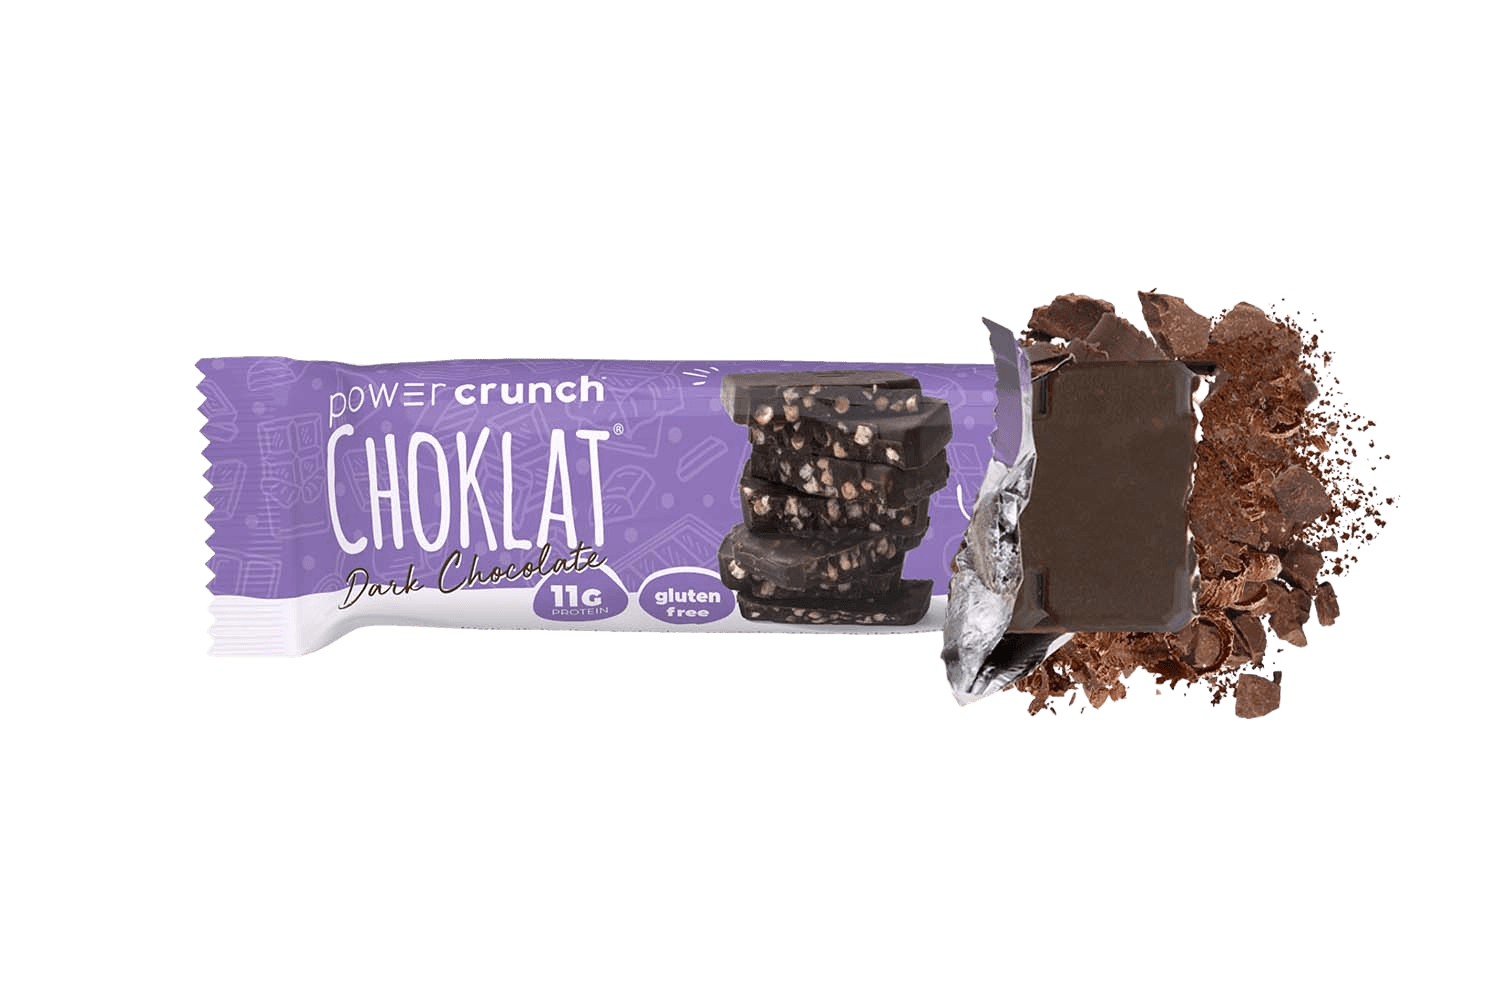 Power Crunch Choklat Dark Chocolate bars pictured with chocolate flavor explosion